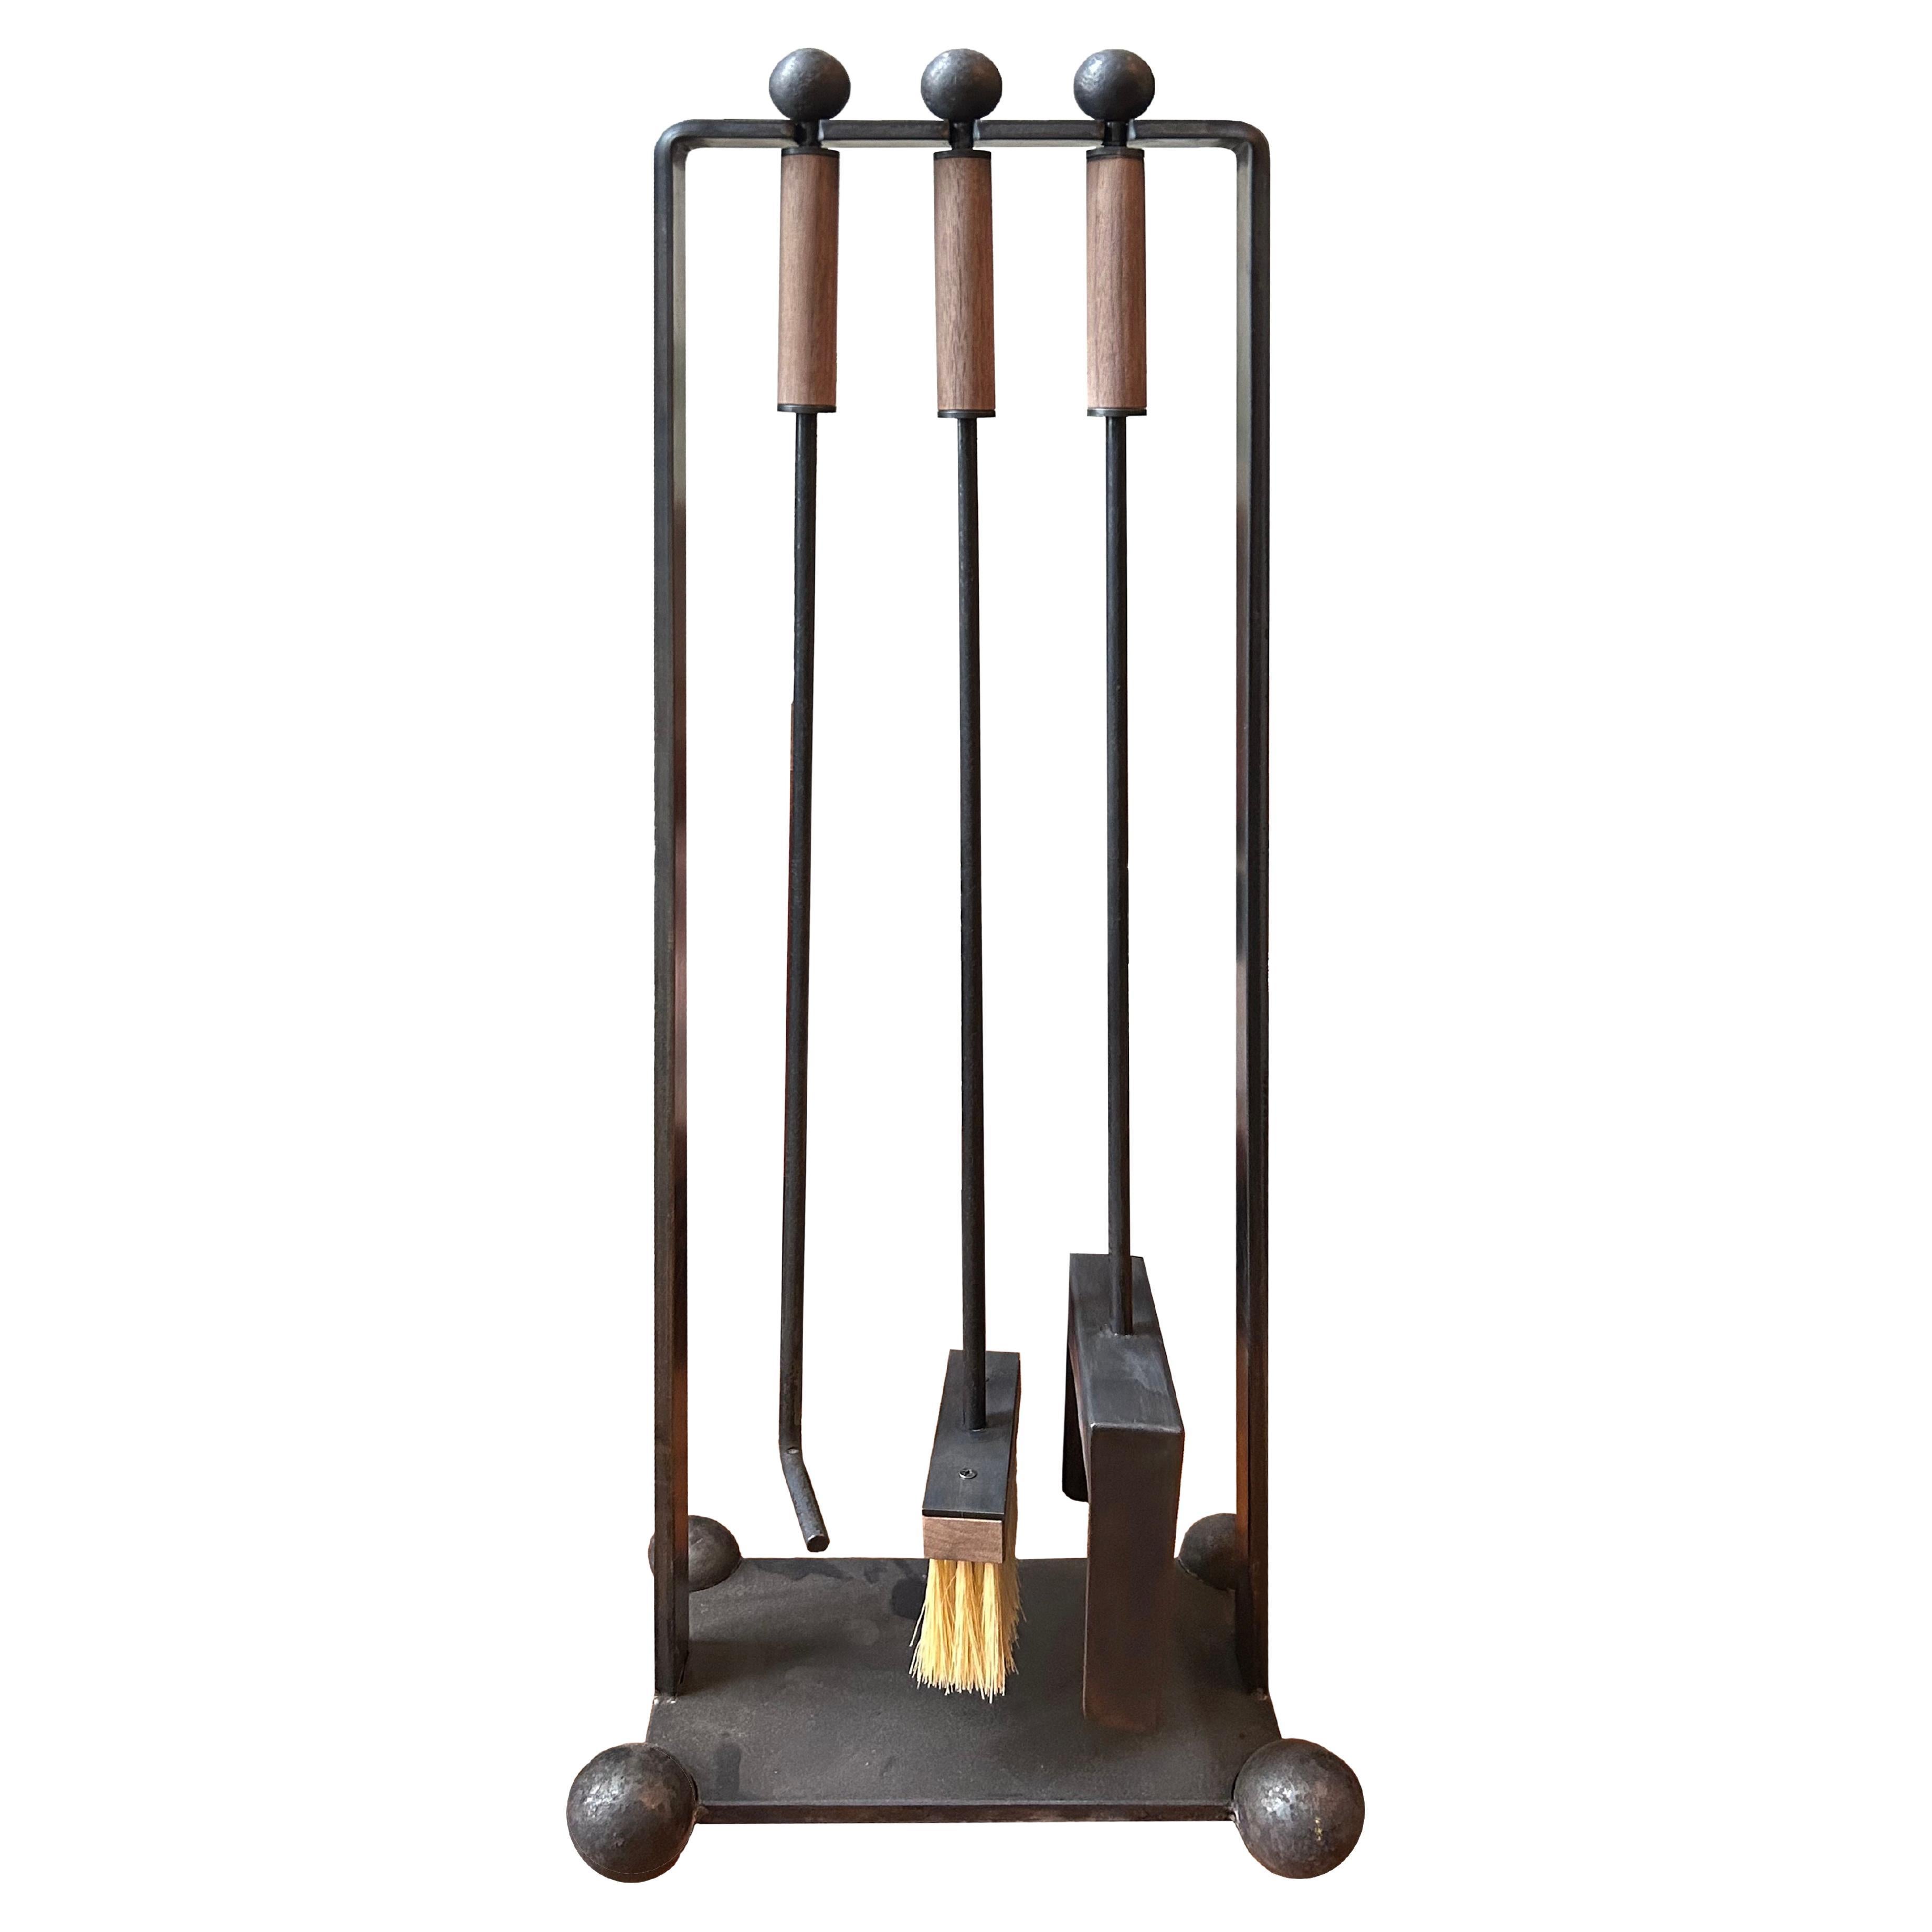 The Flecto Fireplace Tools by Austin, Texas–based studio Muhly blend function with decoration. The pared-back trio of tools are handmade, featuring walnut handles, ball feet, and a handmade natural Tampico brush.